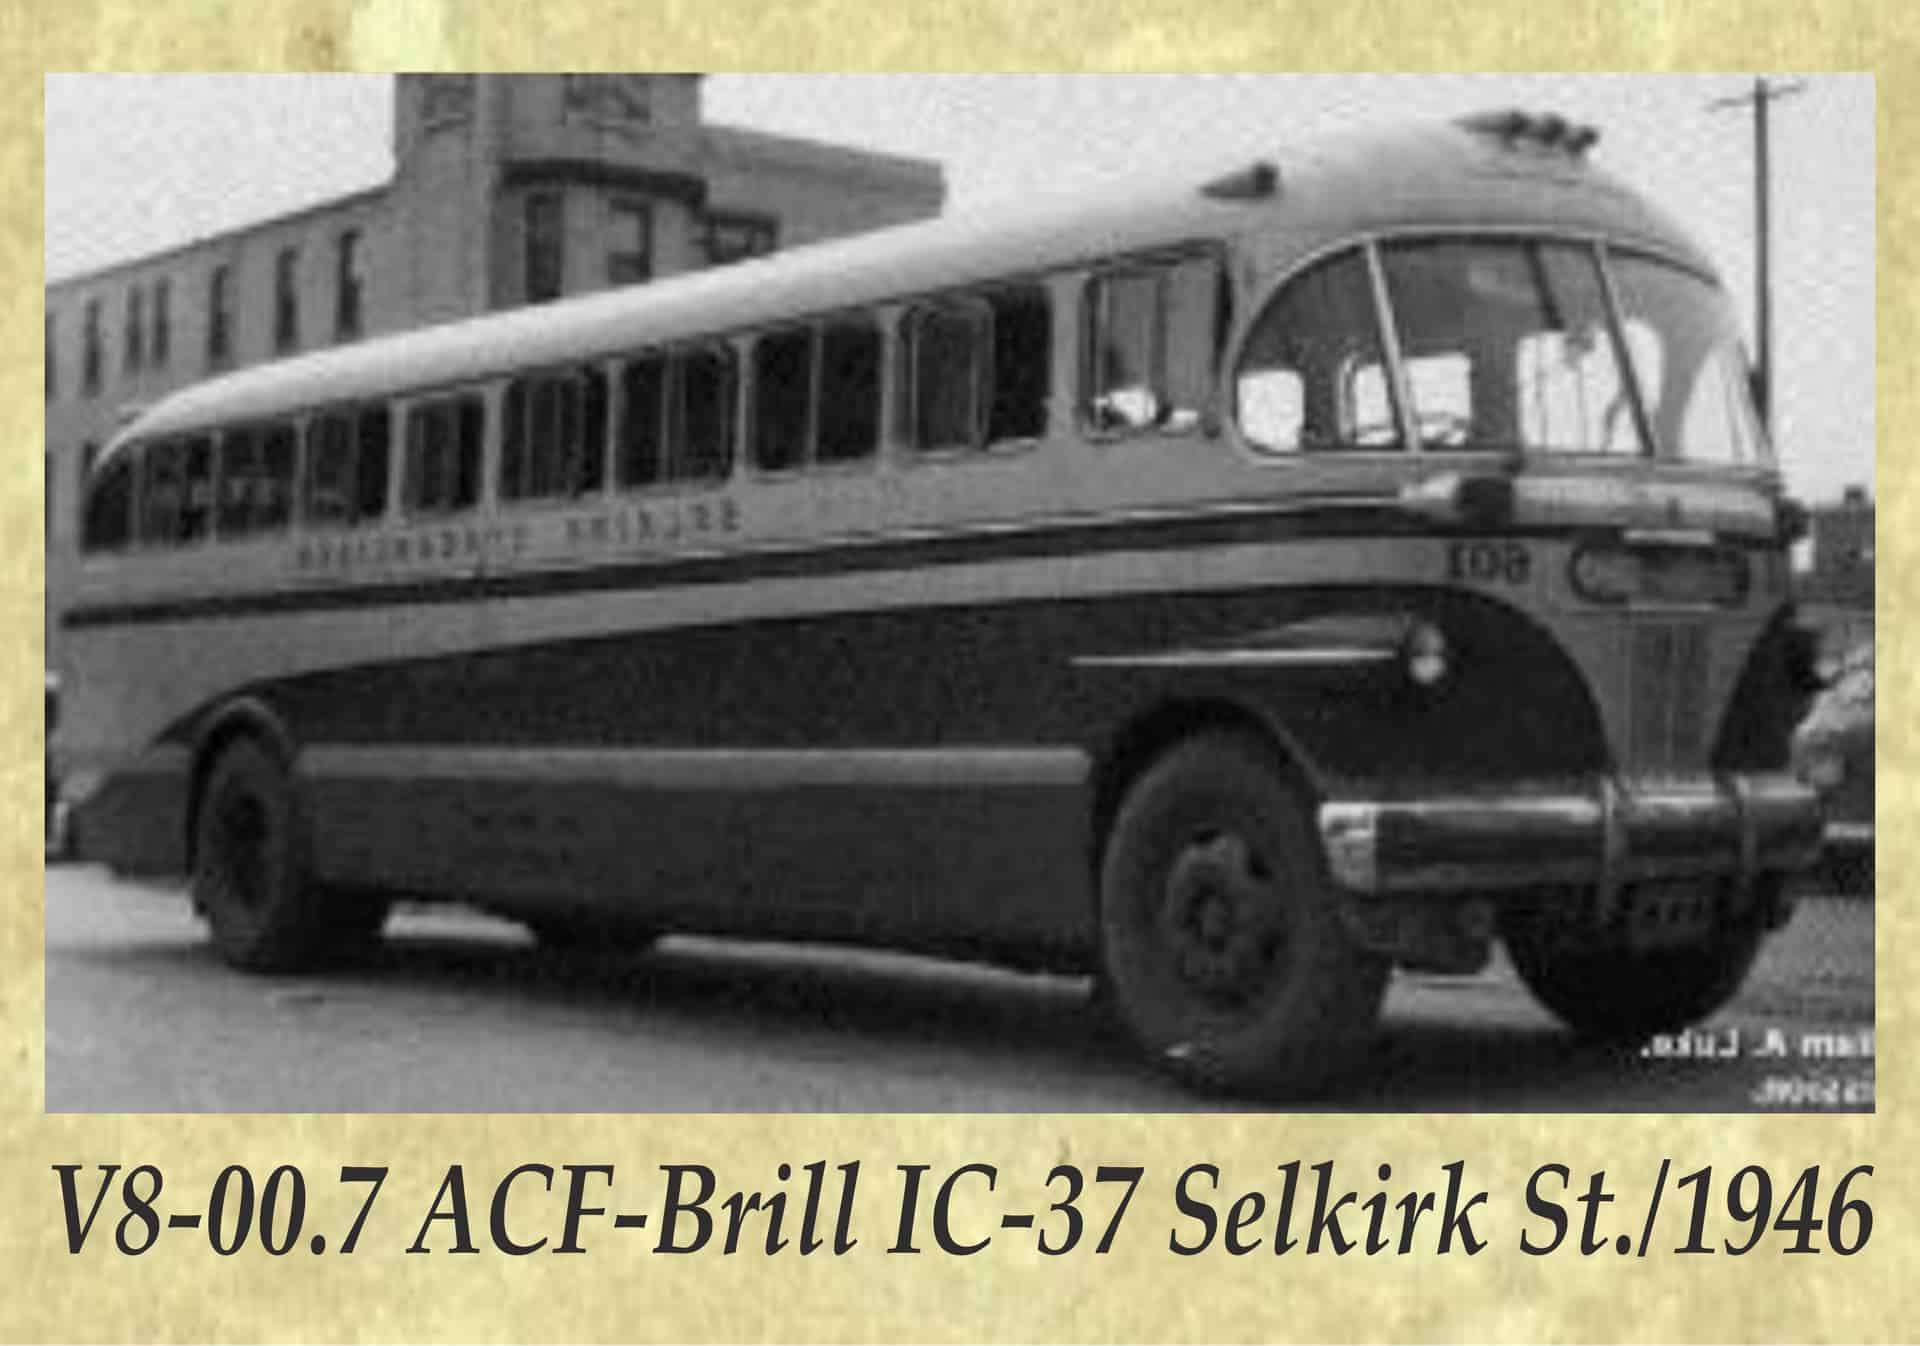 V8-00.7 ACF-Brill IC-37 Selkirk St._1946